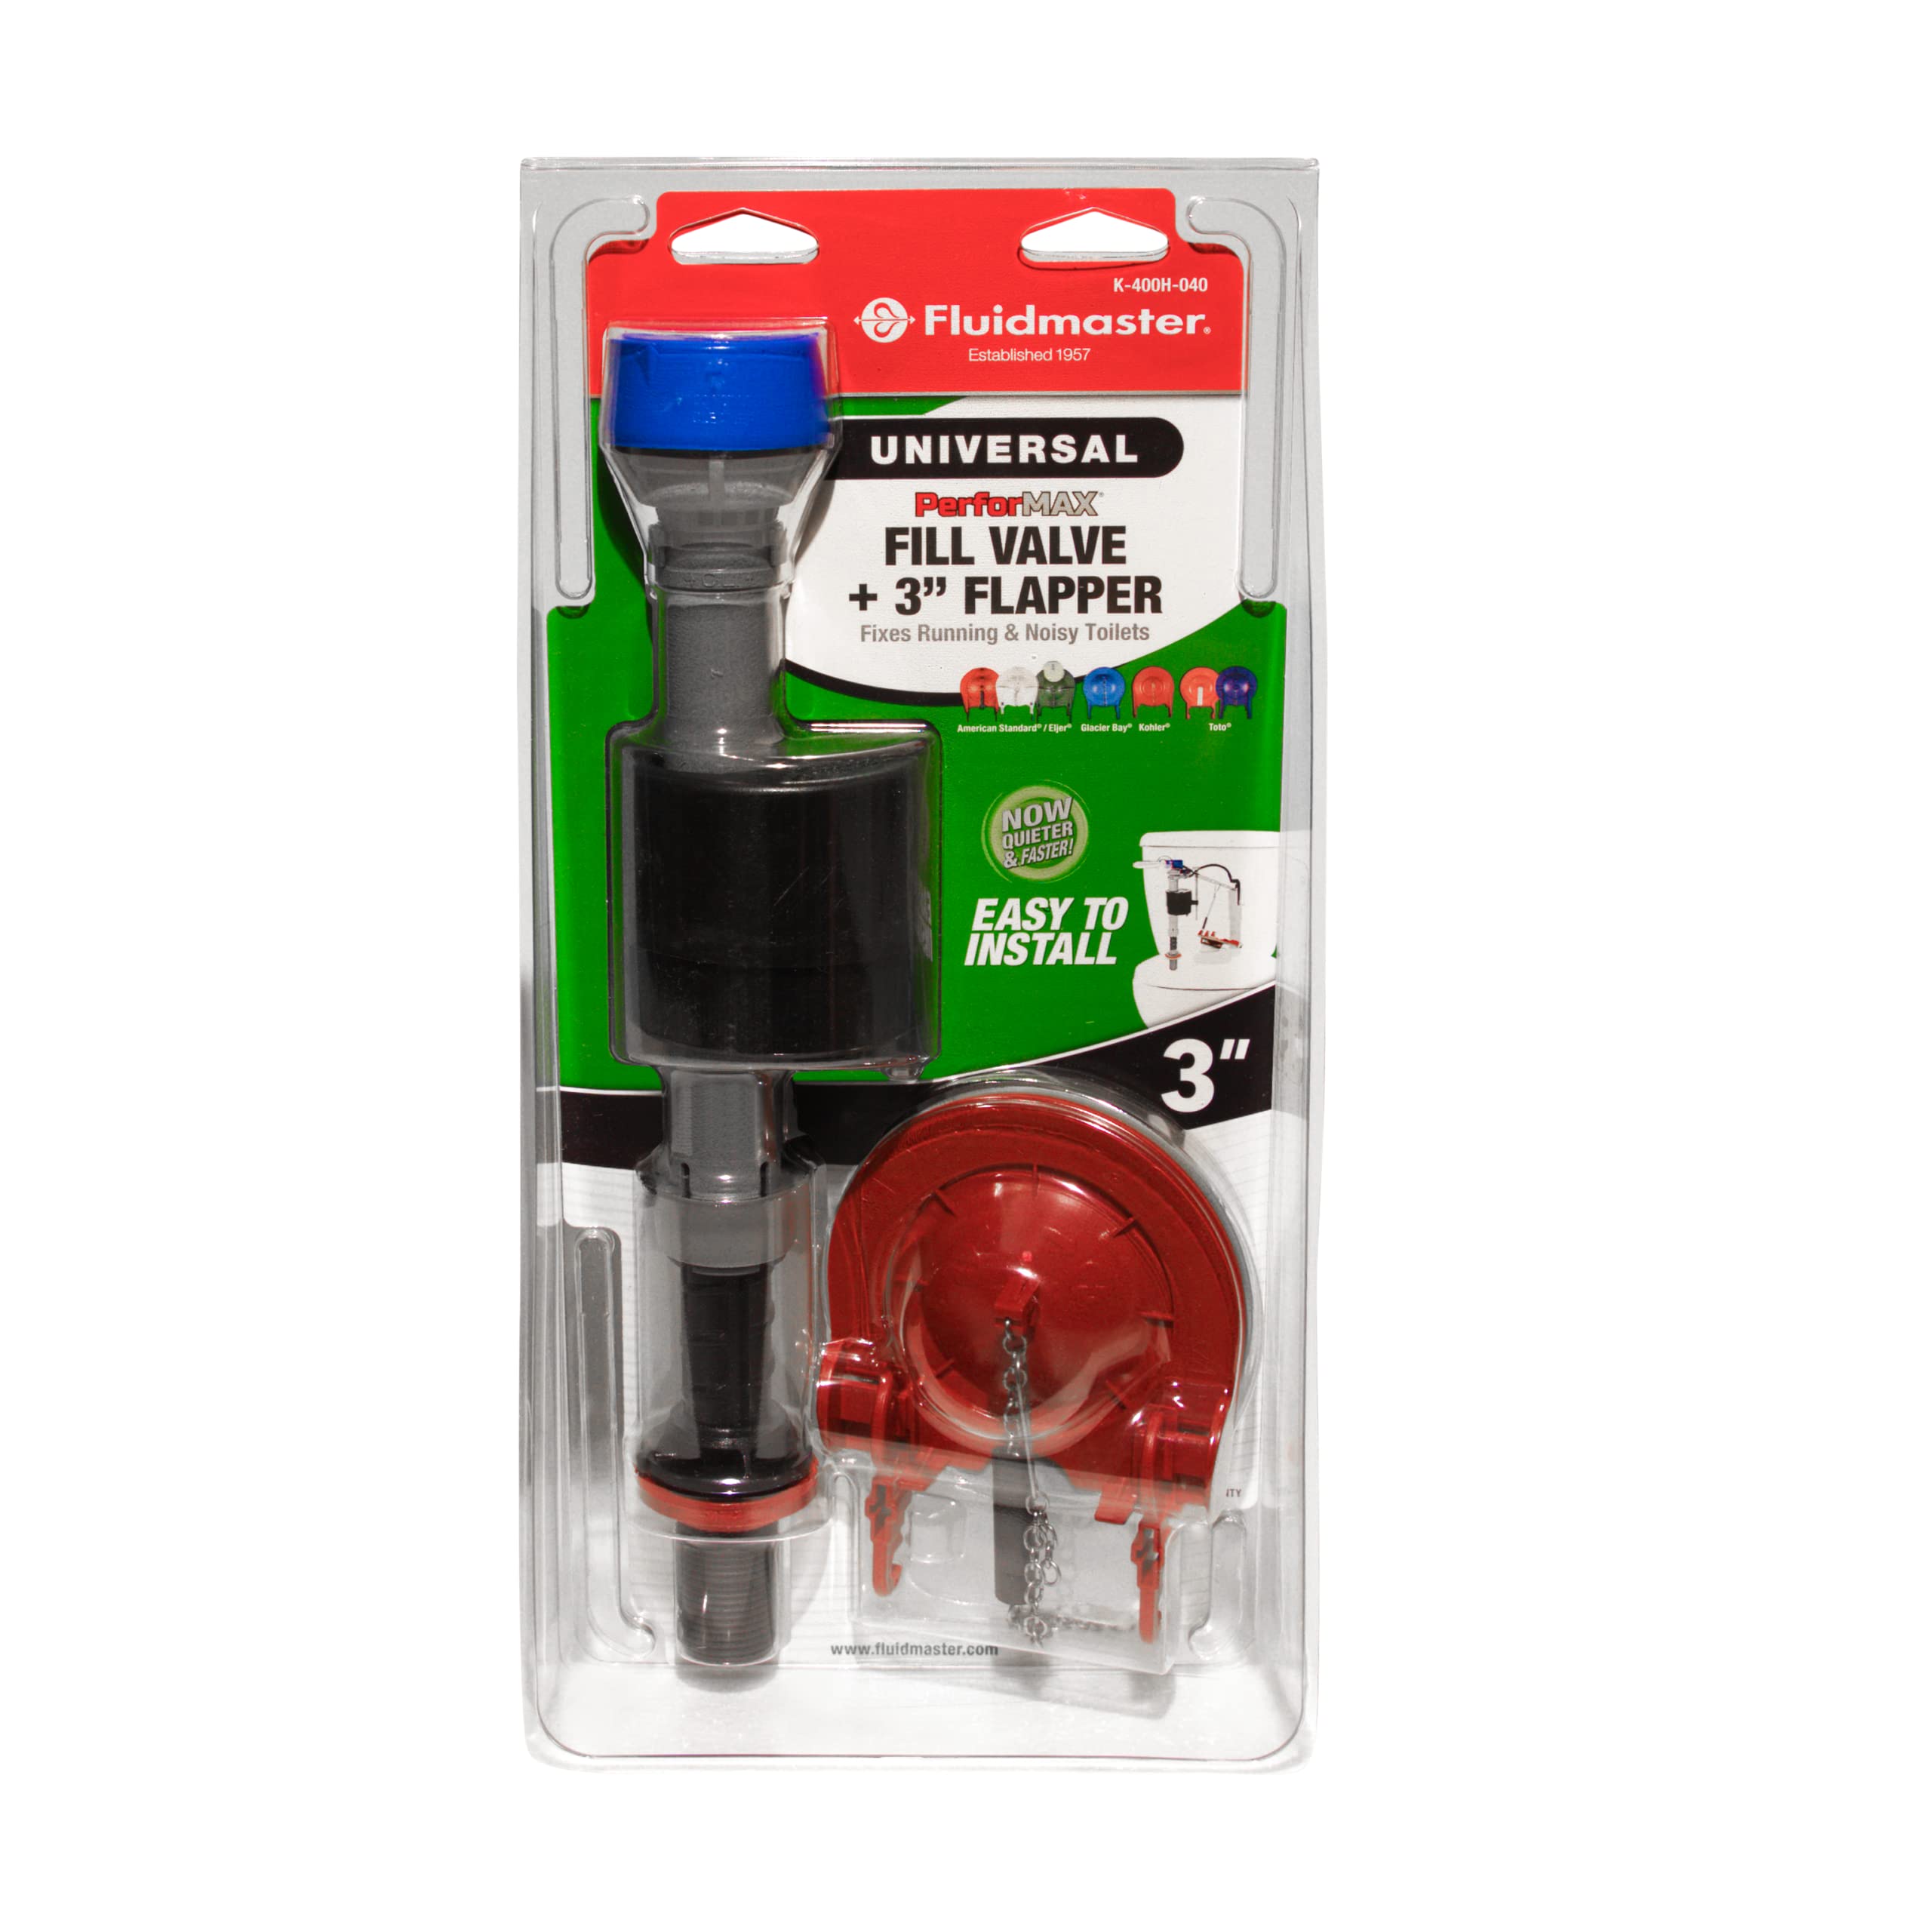 Fluidmaster K-400H-040-T5 PerforMAX Fill Valve and 3-Inch Flapper Toilet Repair Kit, Universal, for 3 In, Multicolor